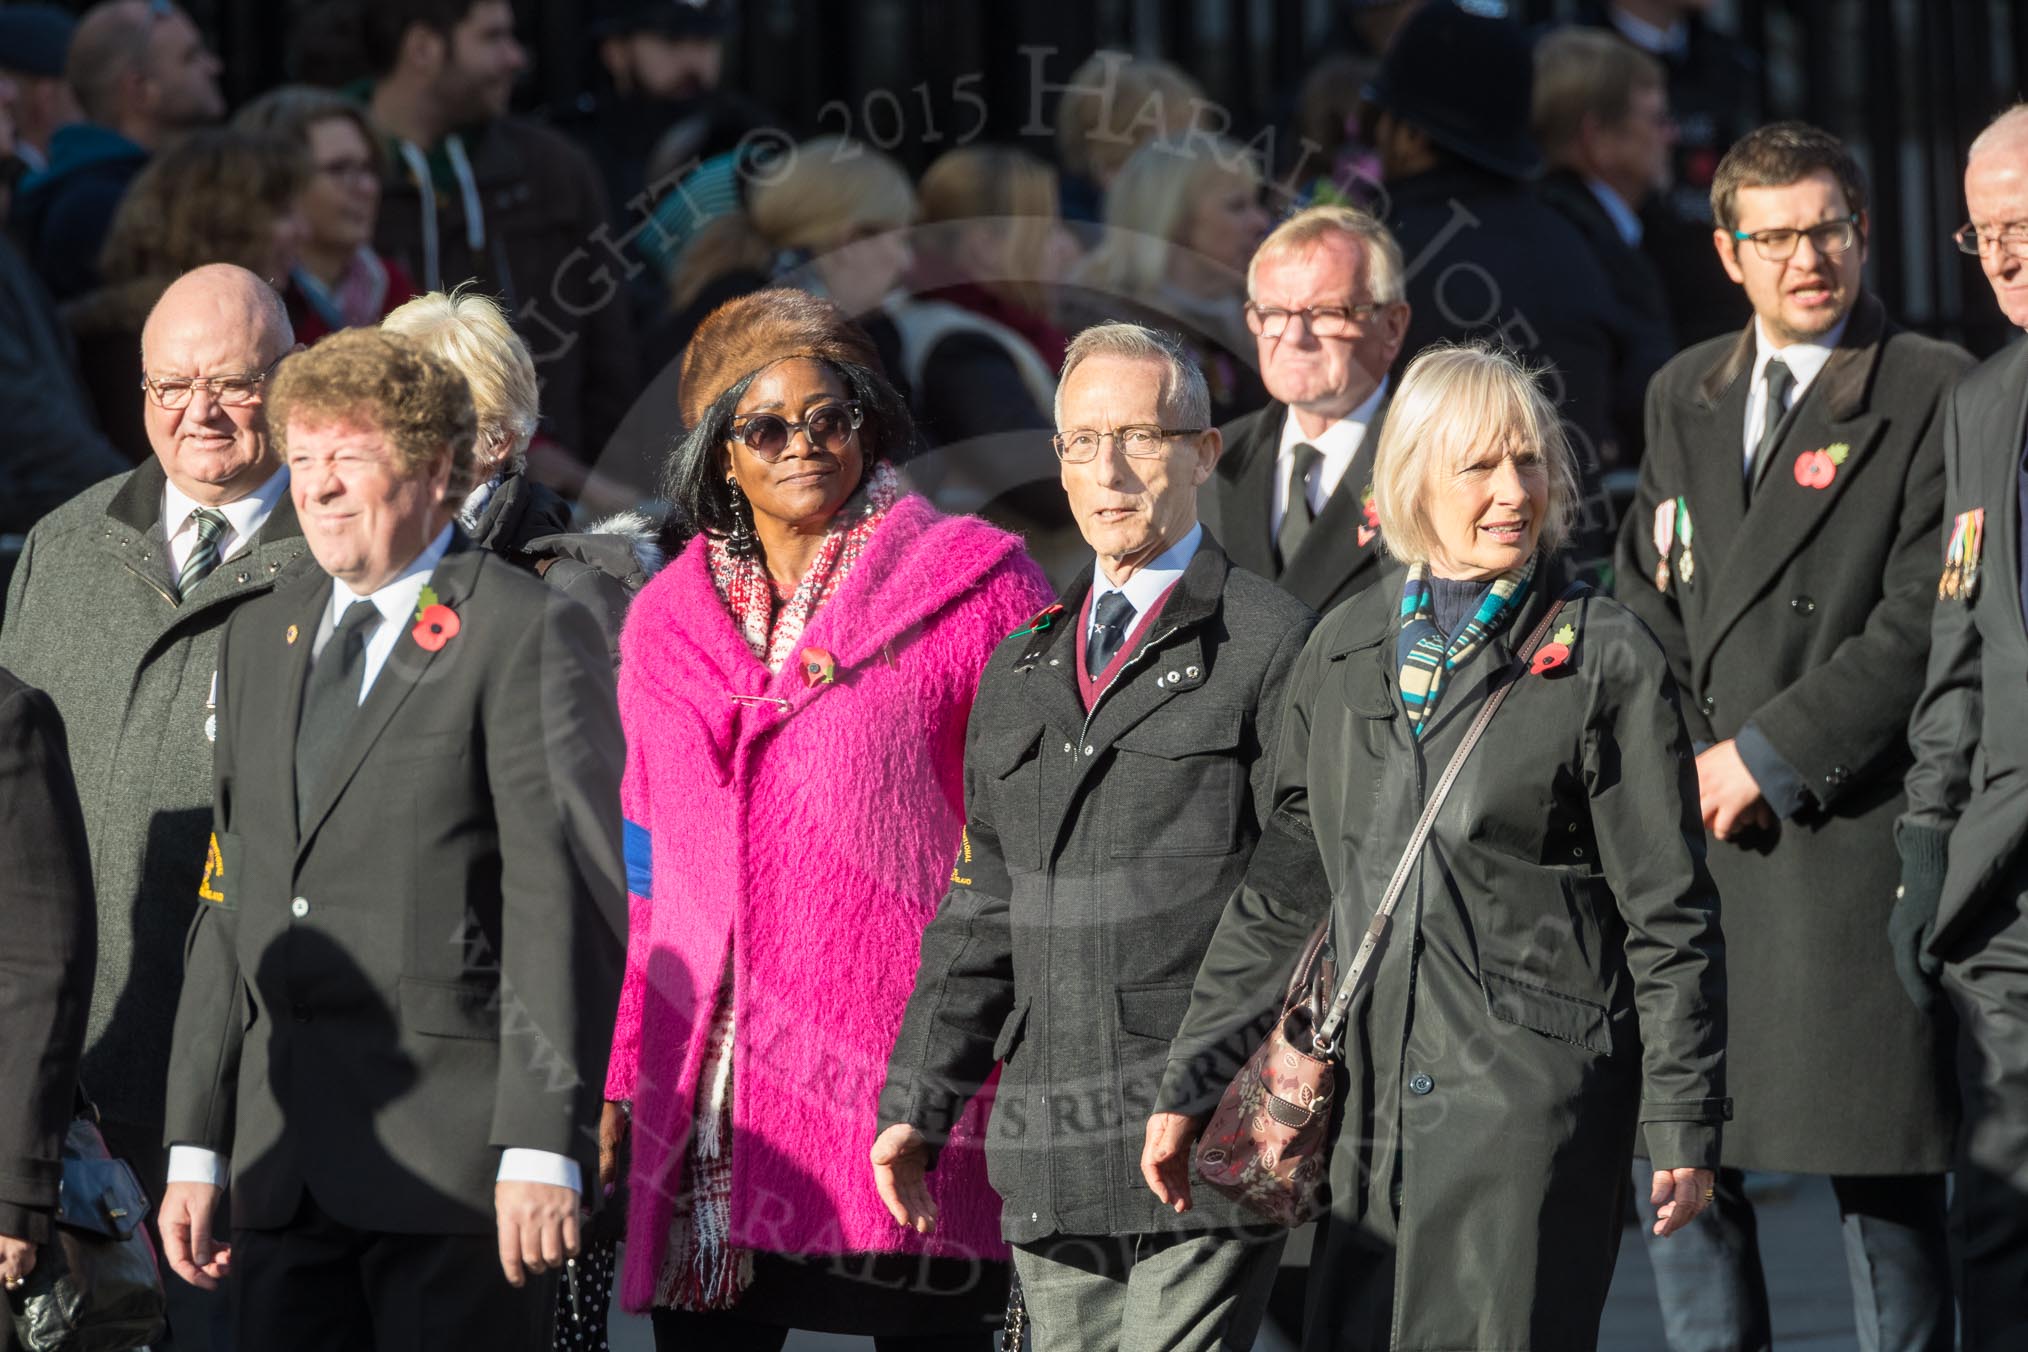 March Past, Remembrance Sunday at the Cenotaph 2016: M28 Lions Club International.
Cenotaph, Whitehall, London SW1,
London,
Greater London,
United Kingdom,
on 13 November 2016 at 13:17, image #2745